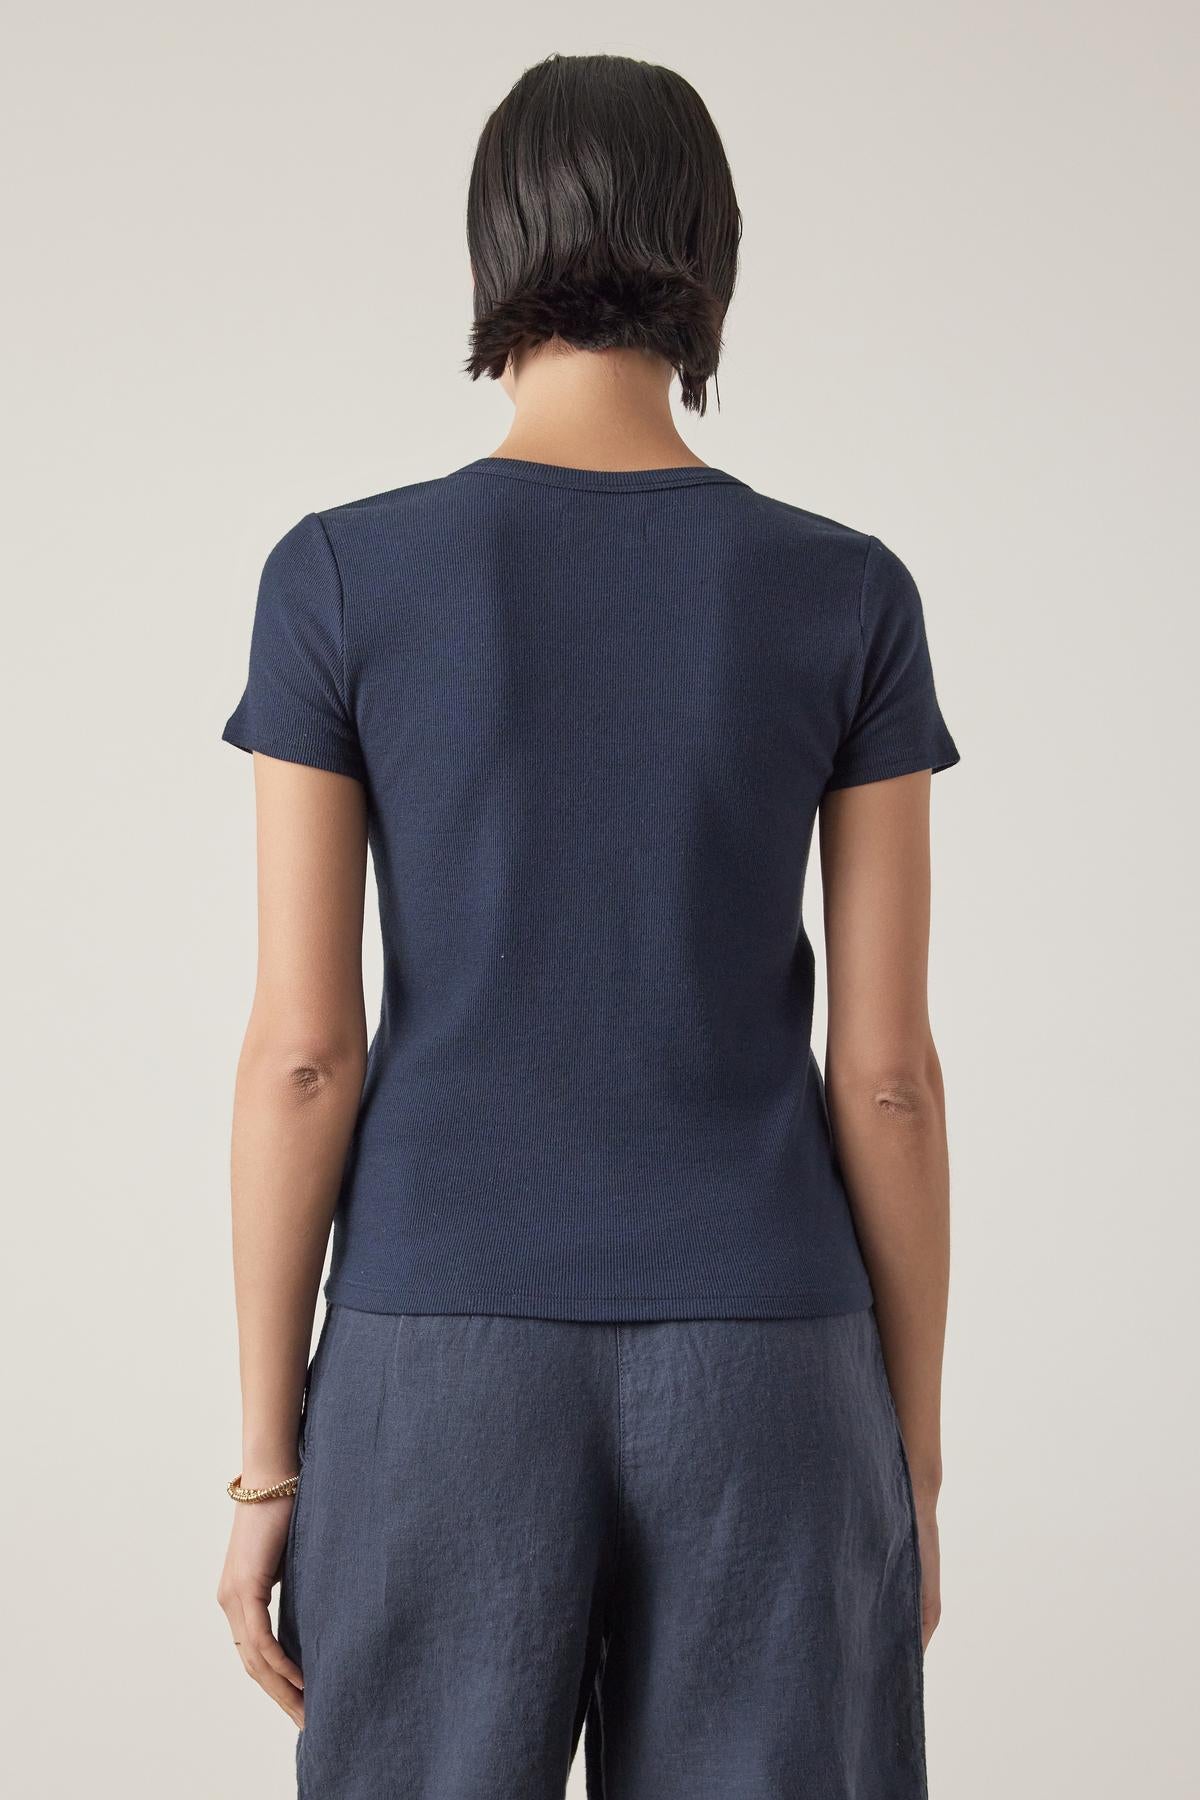 Rear view of a woman in a Velvet by Jenny Graham BEDFORD TEE, a dark blue short-sleeved top with a crew neckline, and grey pants, standing against a light beige background.-36753616928961